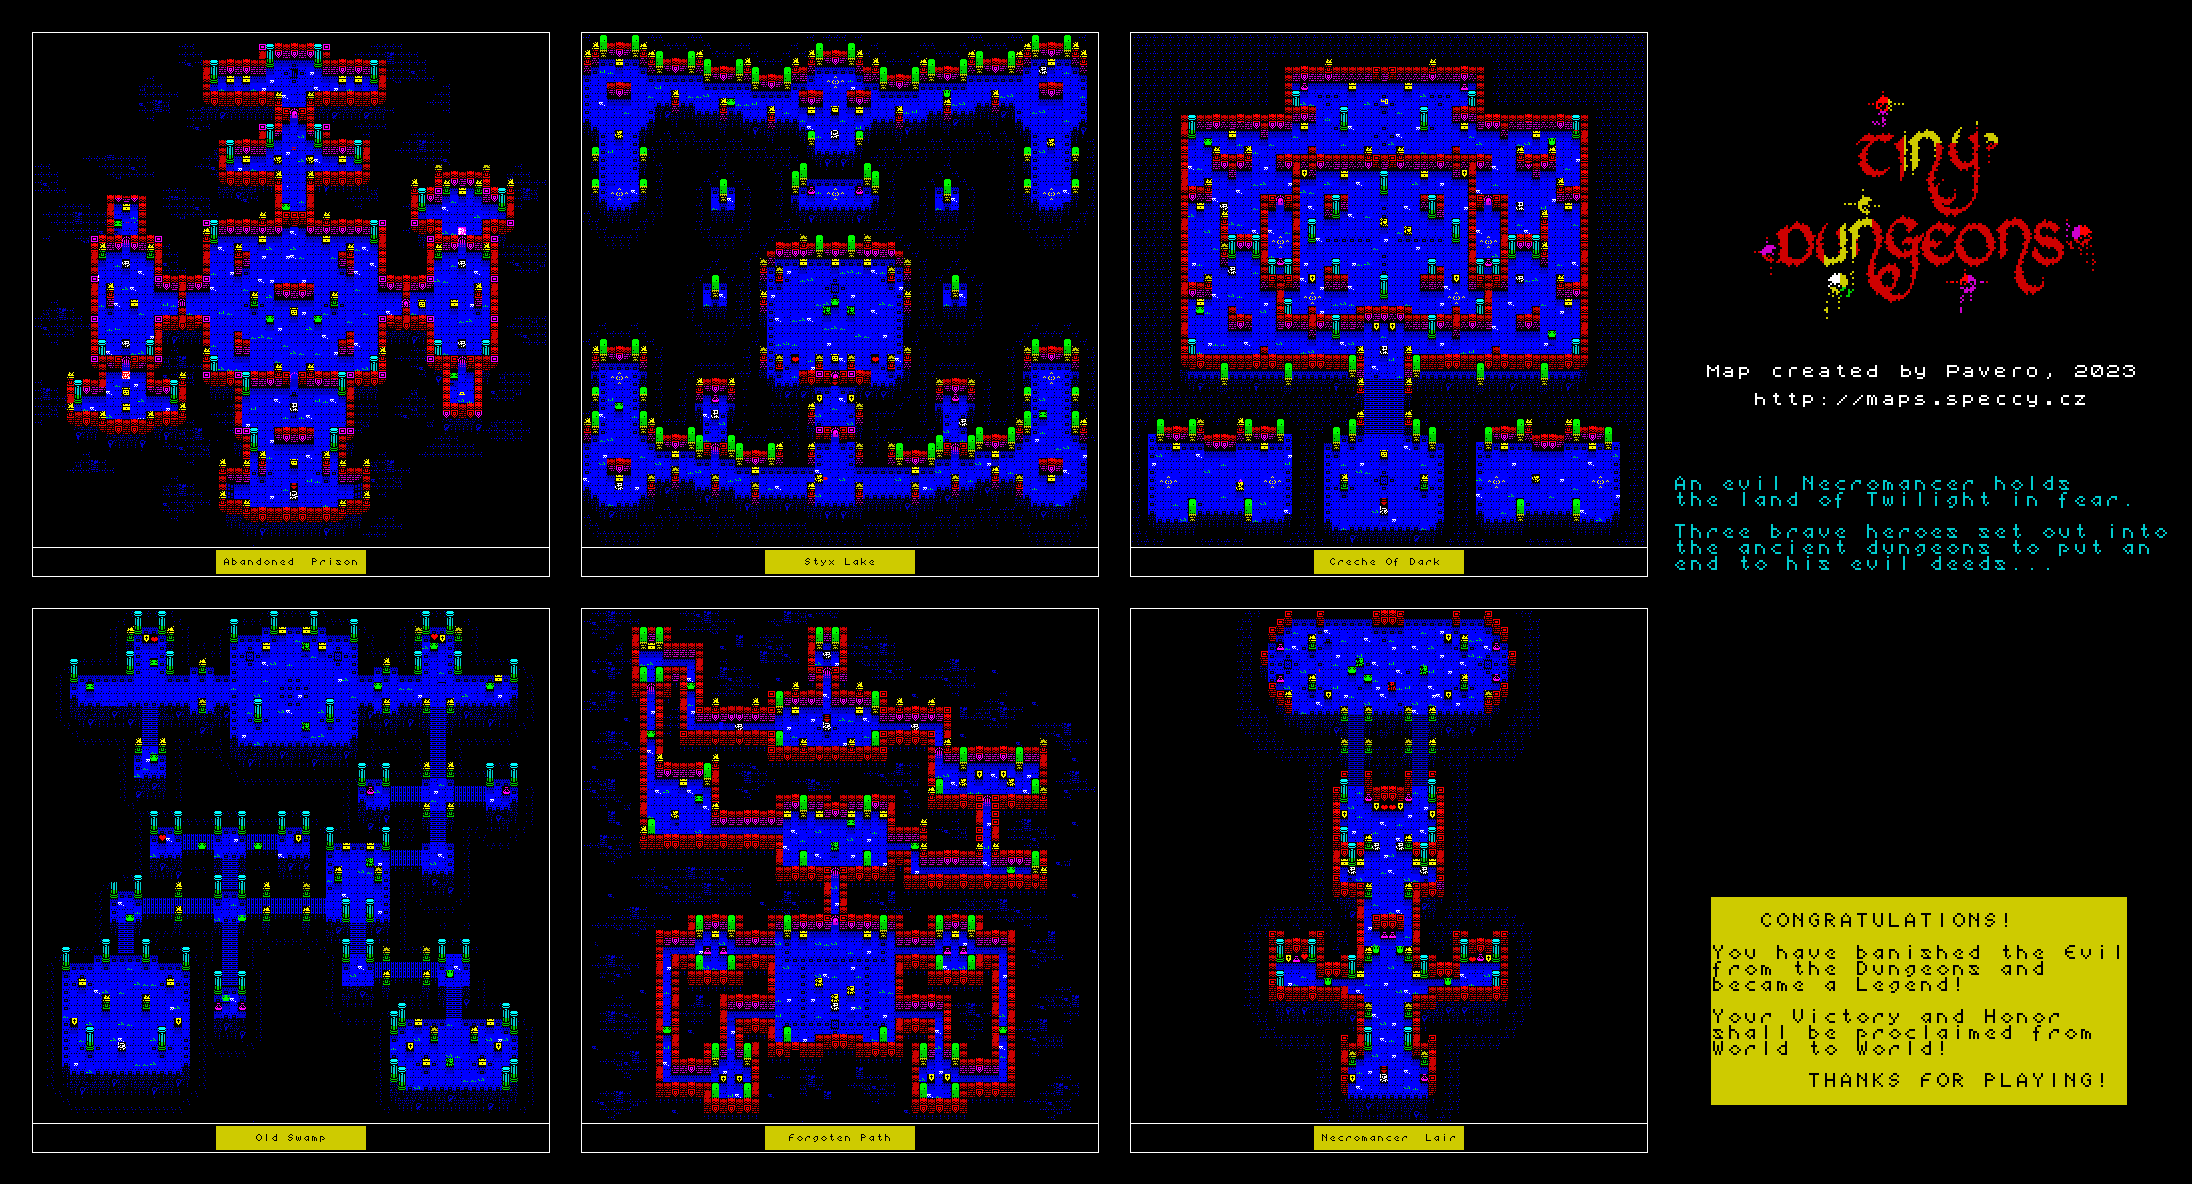 Tiny Dungeons - The Map